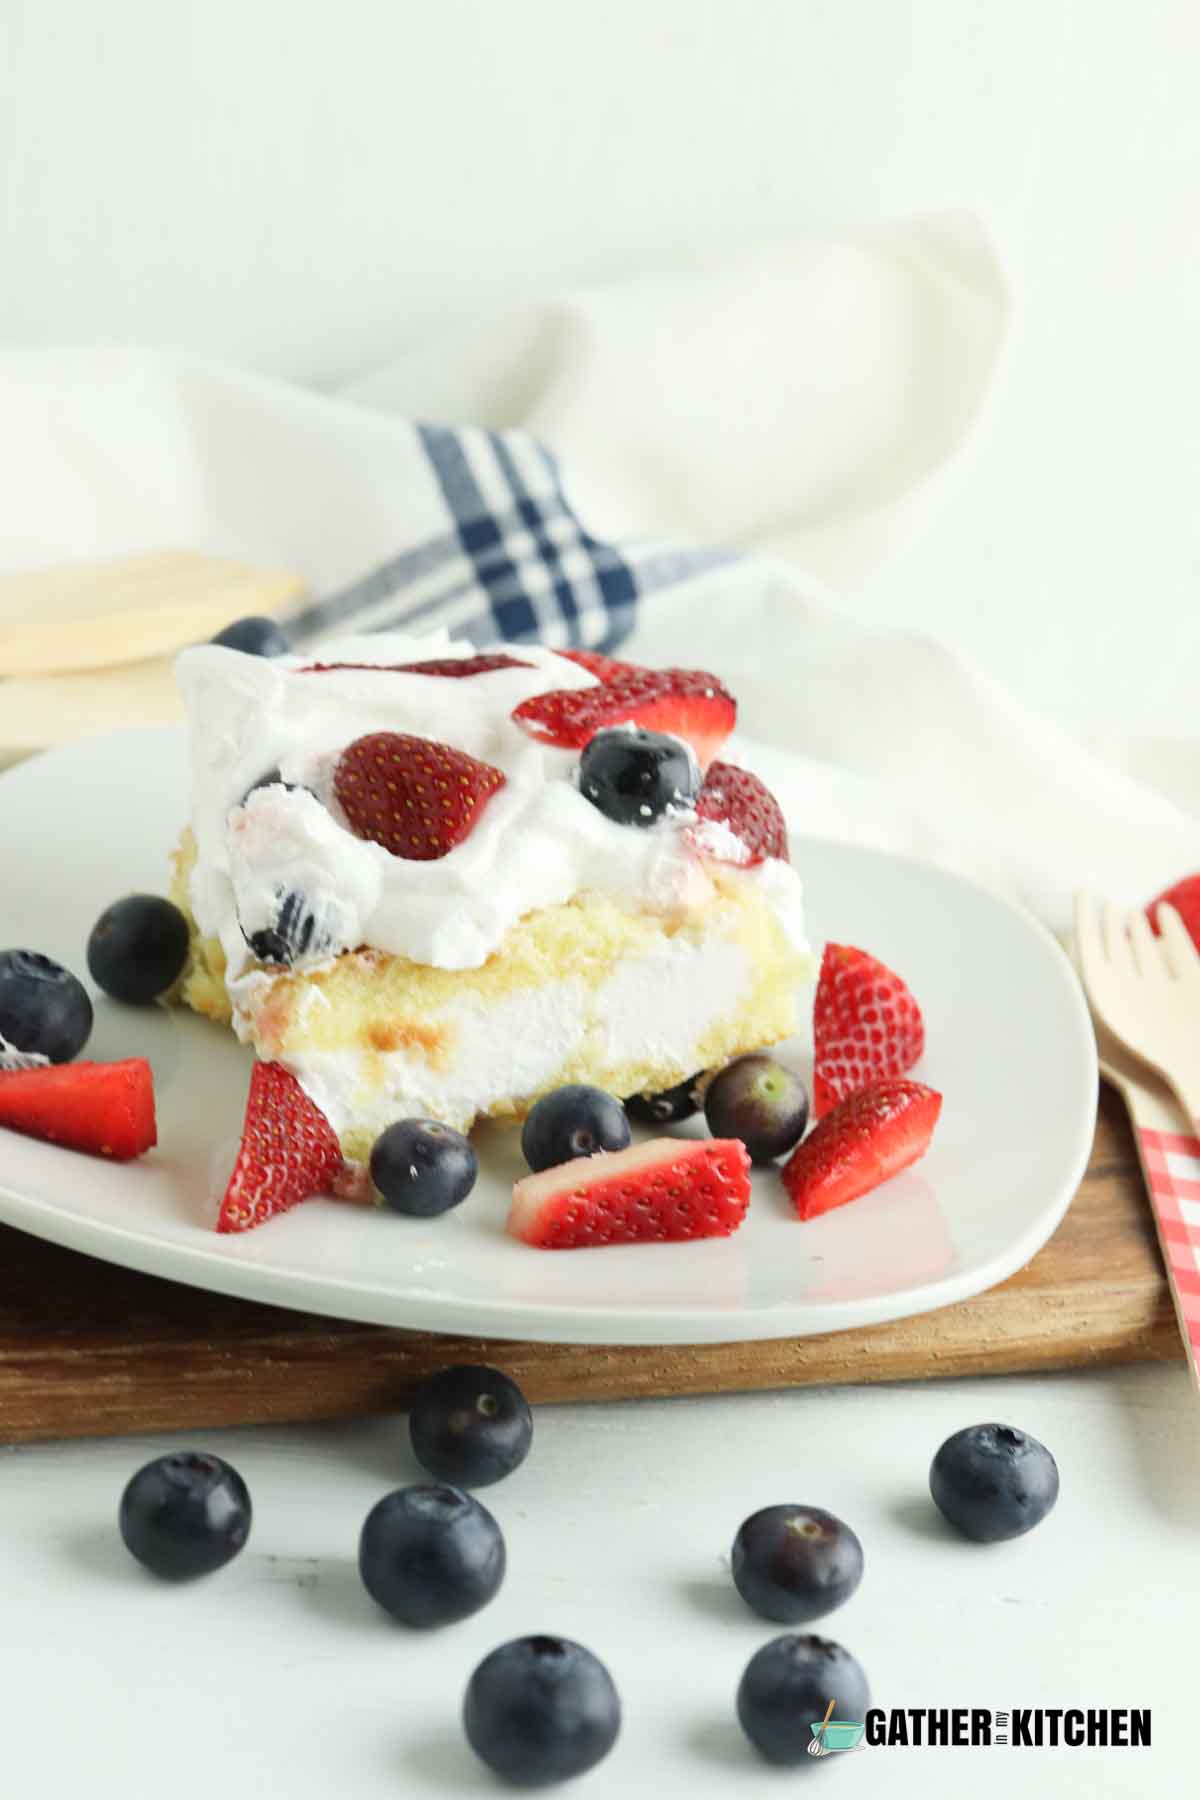 Piece of twinkie shortcake with strawberries and blueberries on a plate.